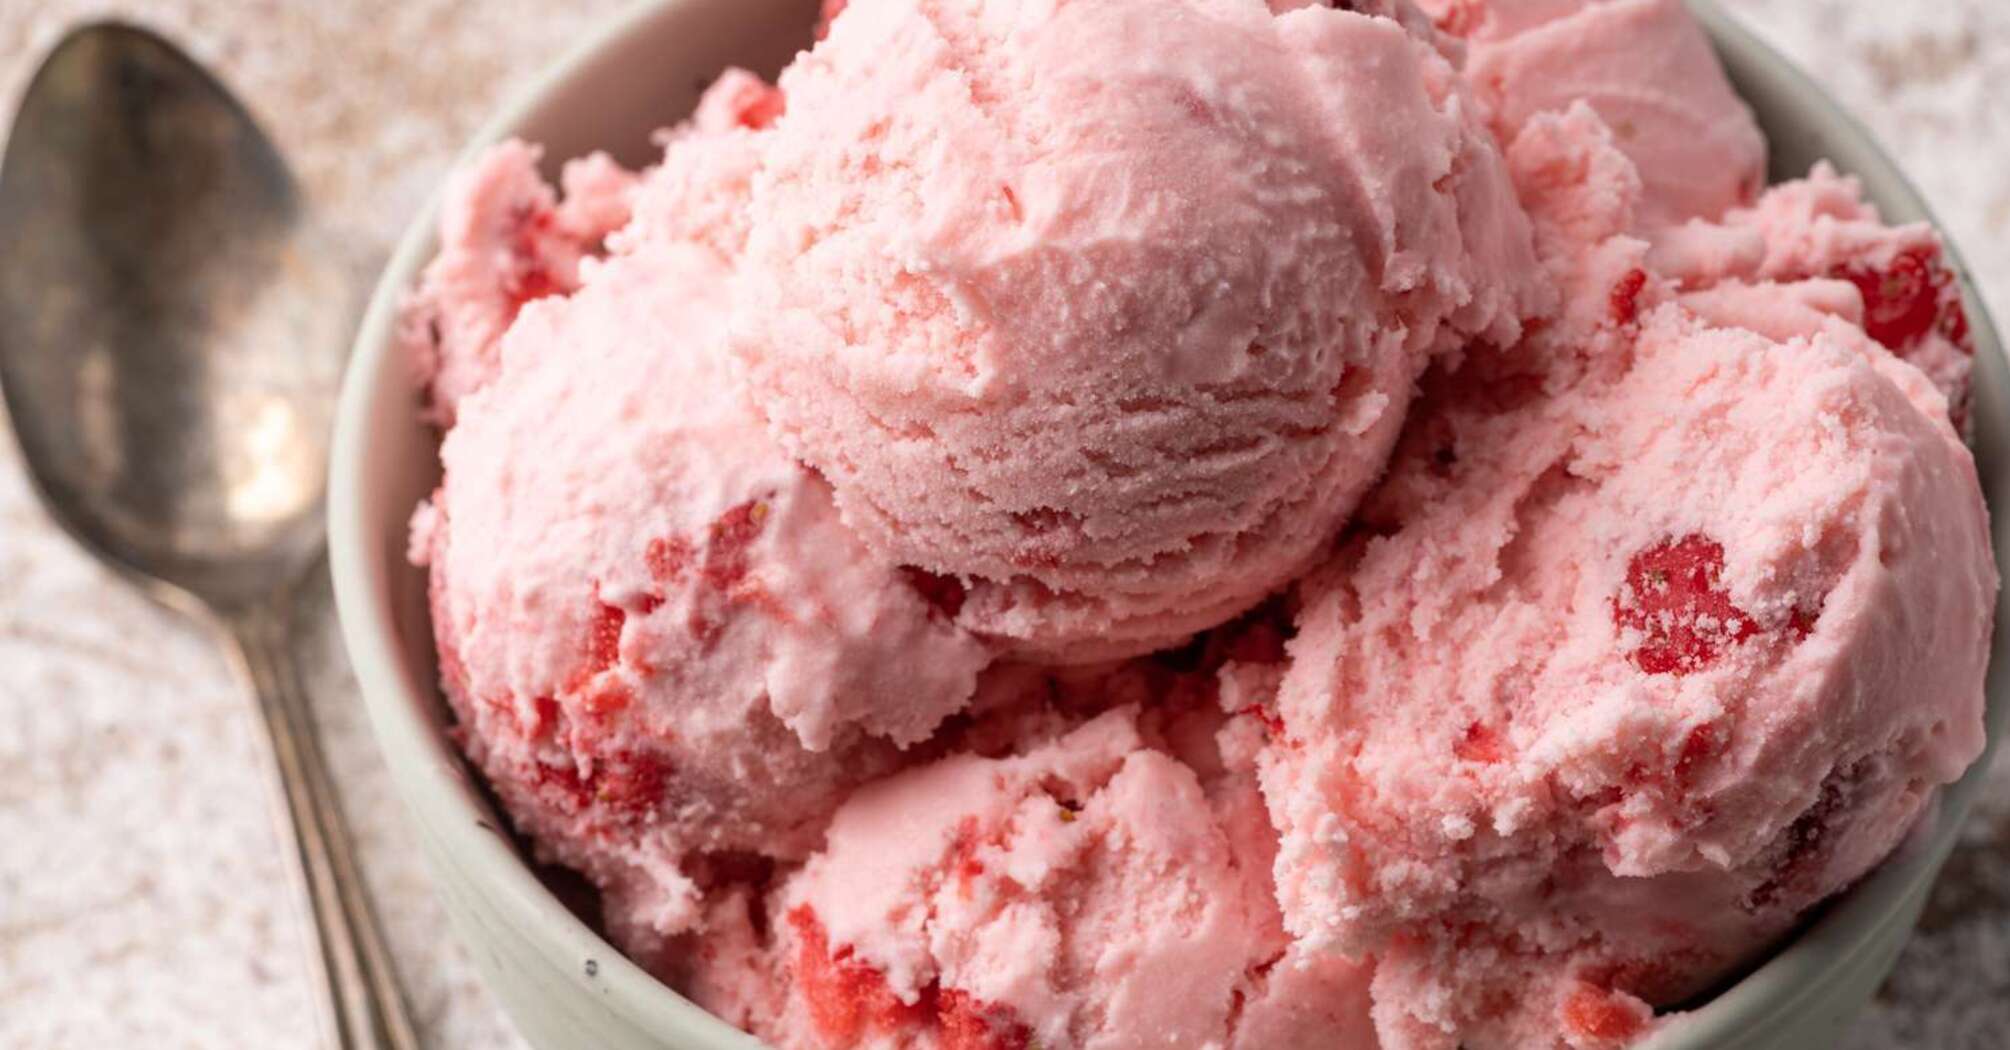 Sugar and milk free: delicious homemade ice cream with two ingredients